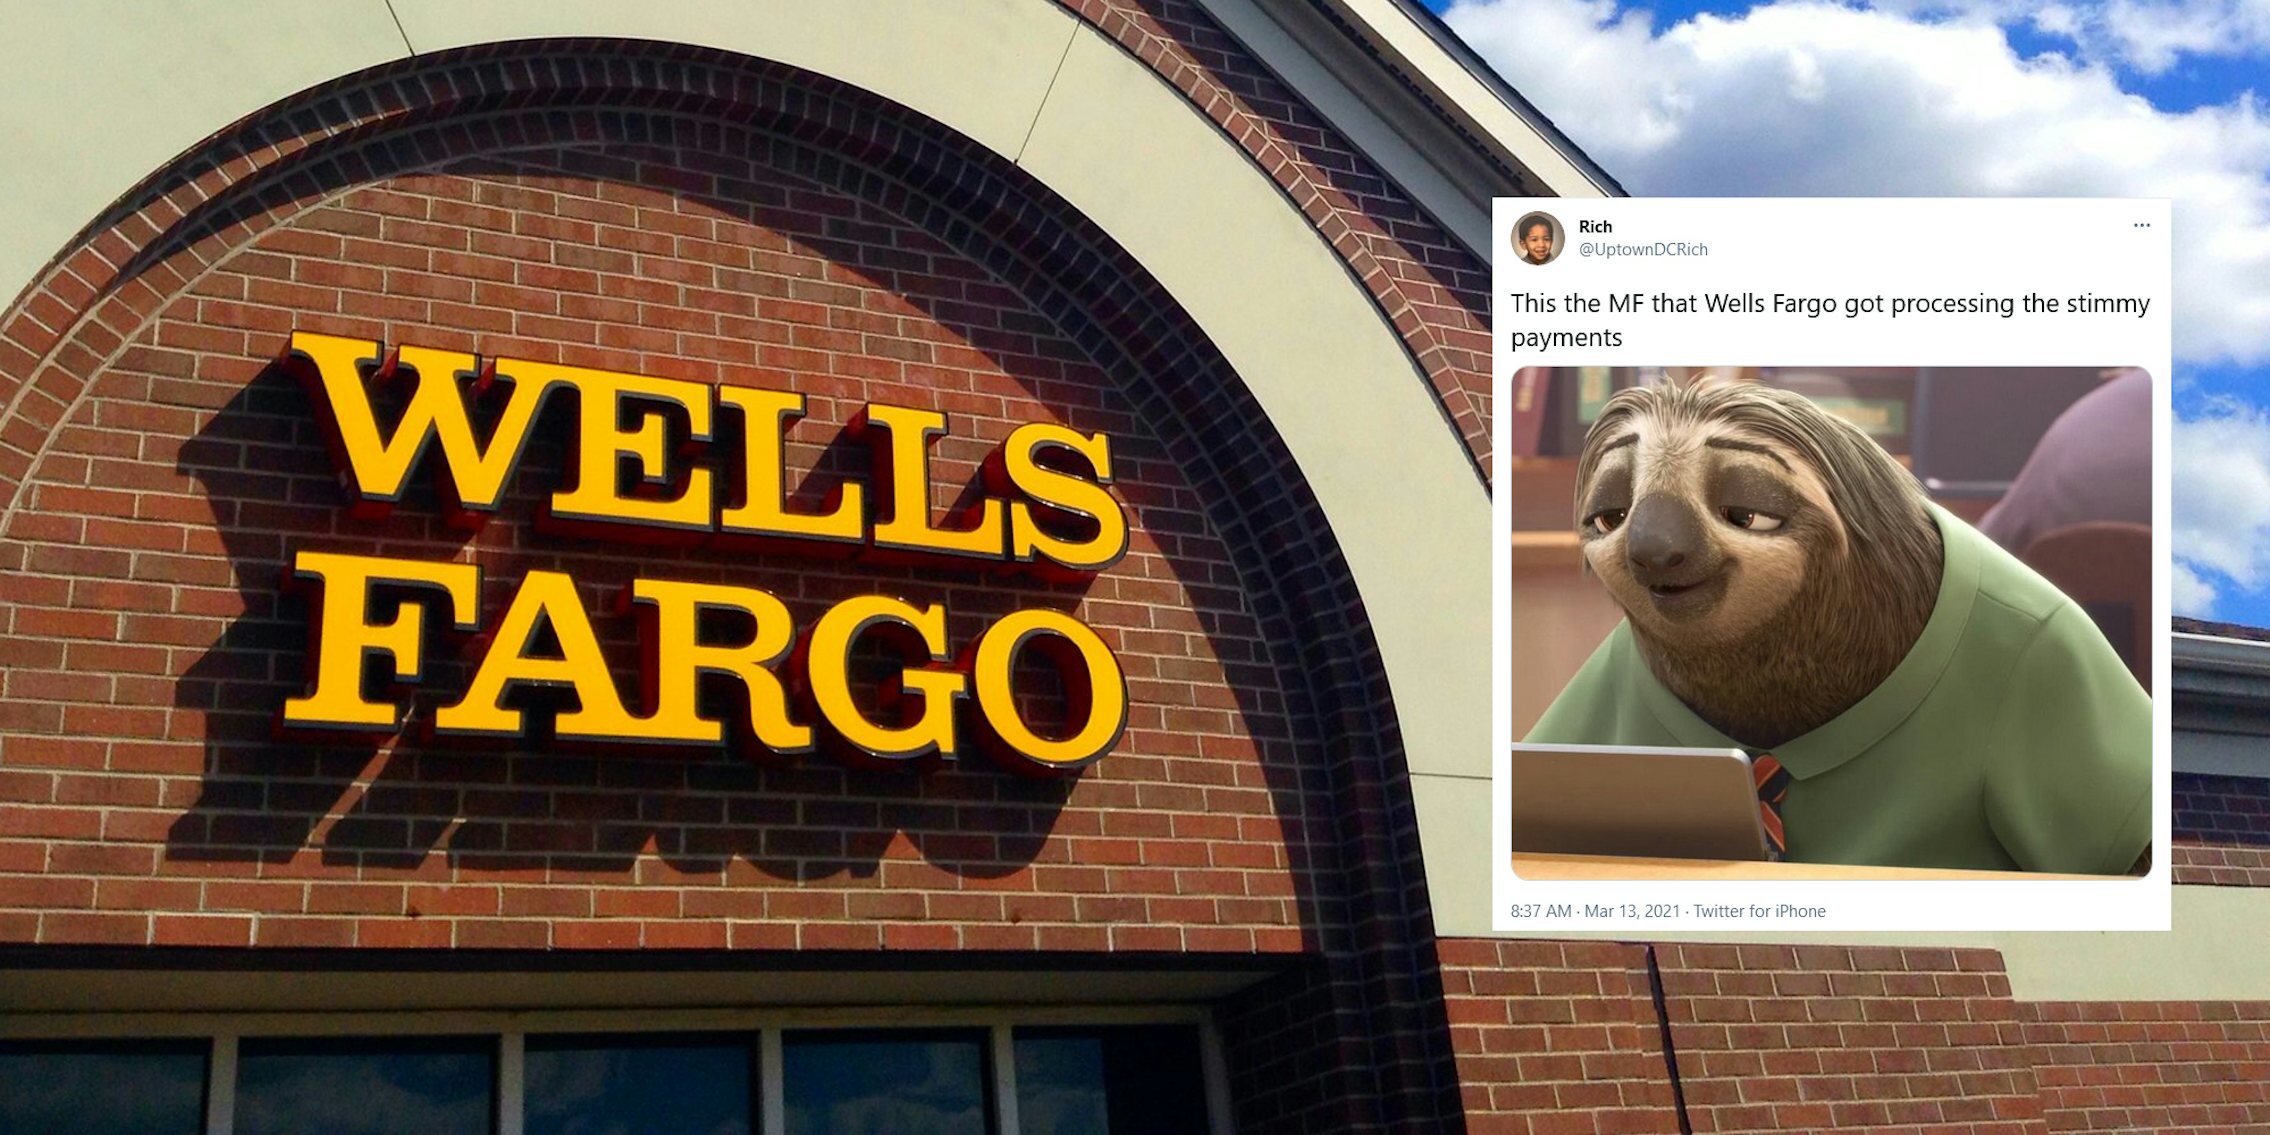 A picture of a Wells Fargo bank next to a tweet venting about the slowness of the bank processing coronavirus stimulus checks.